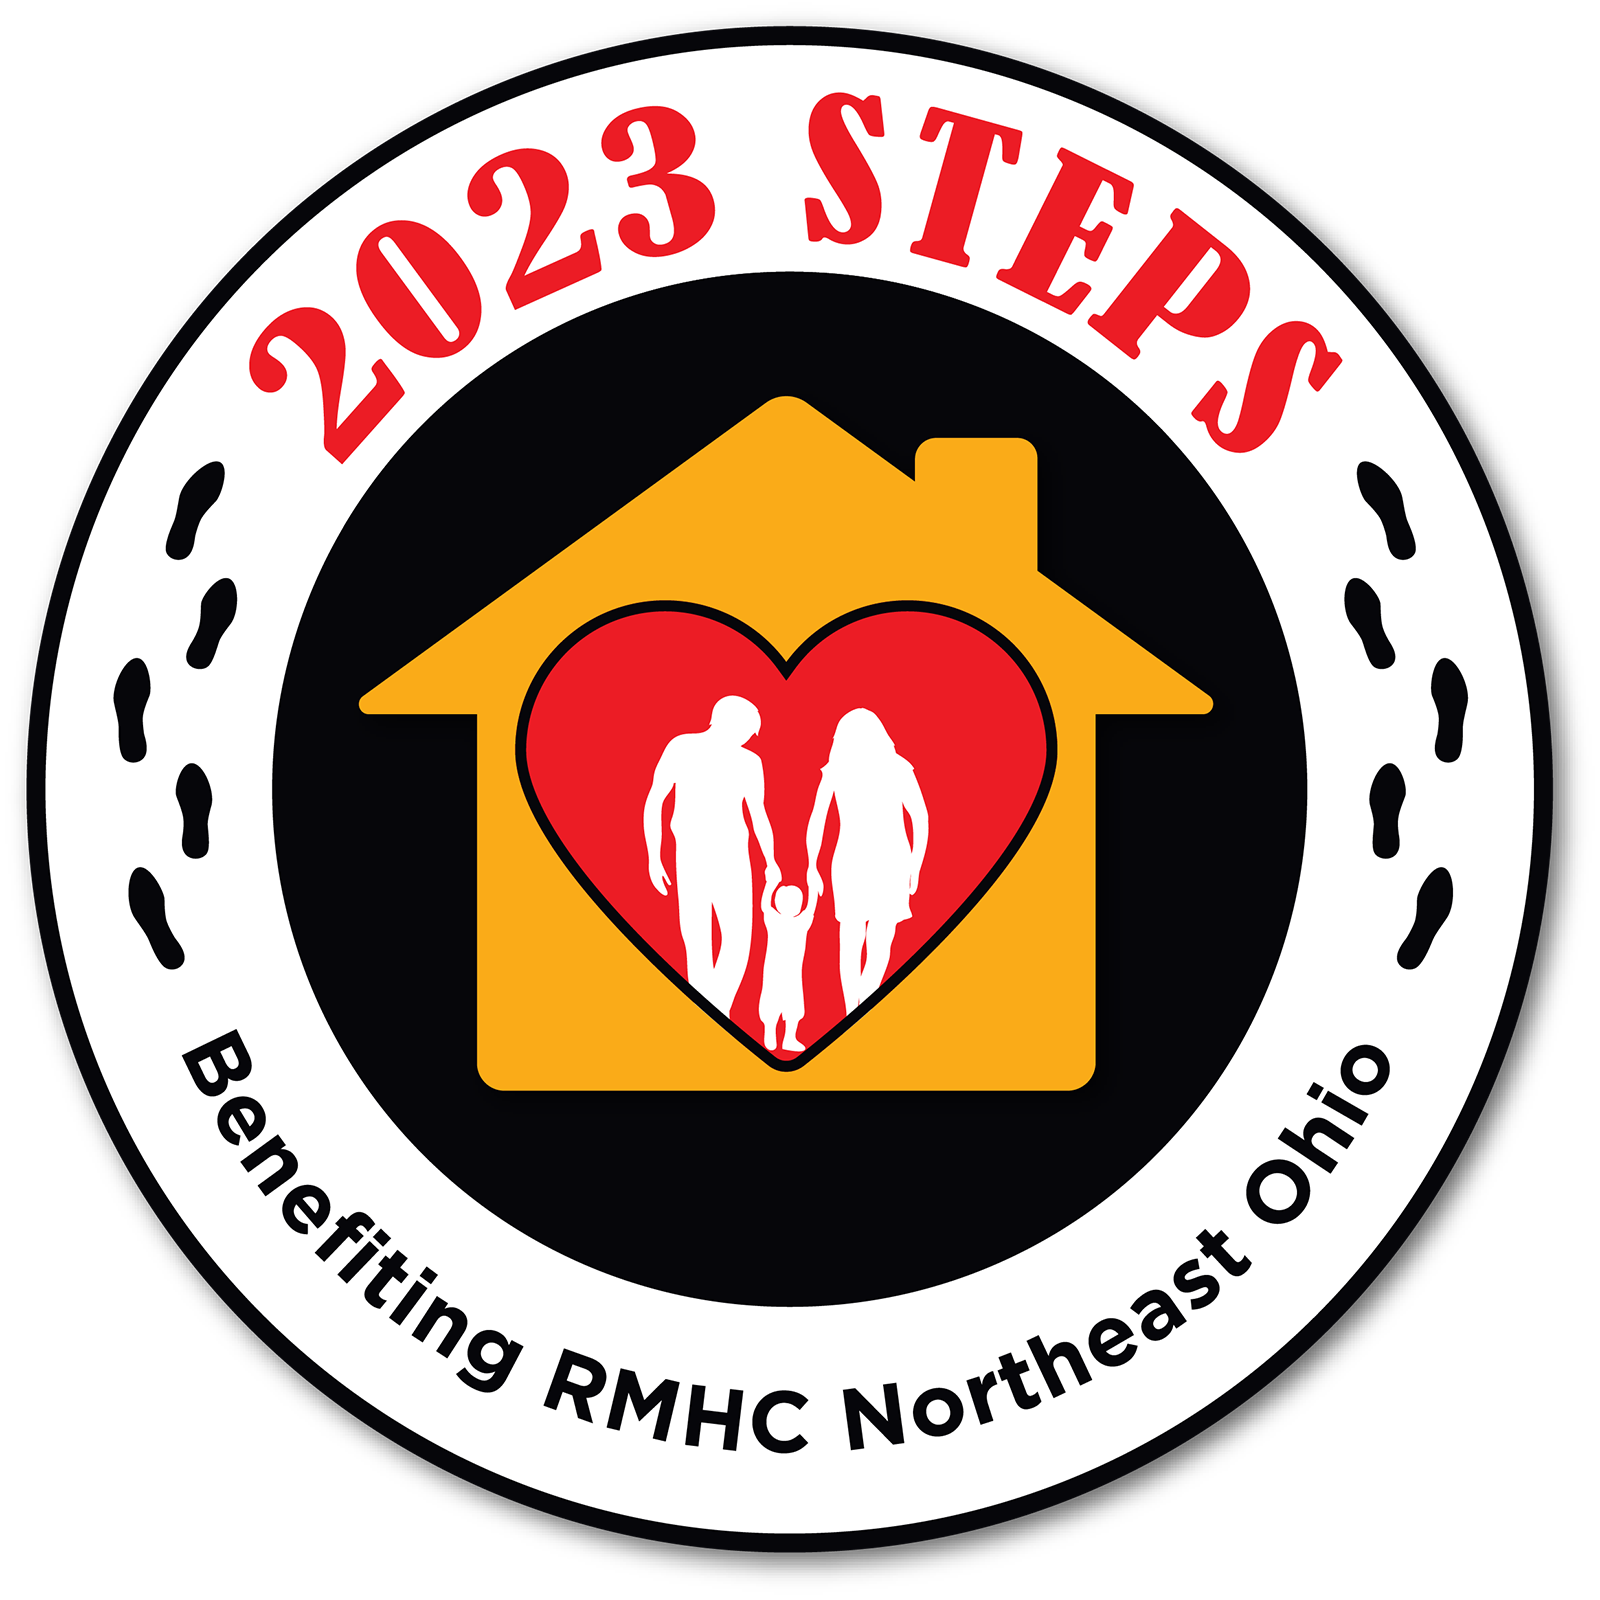 Steps for Ronald McDonald House of Cleveland